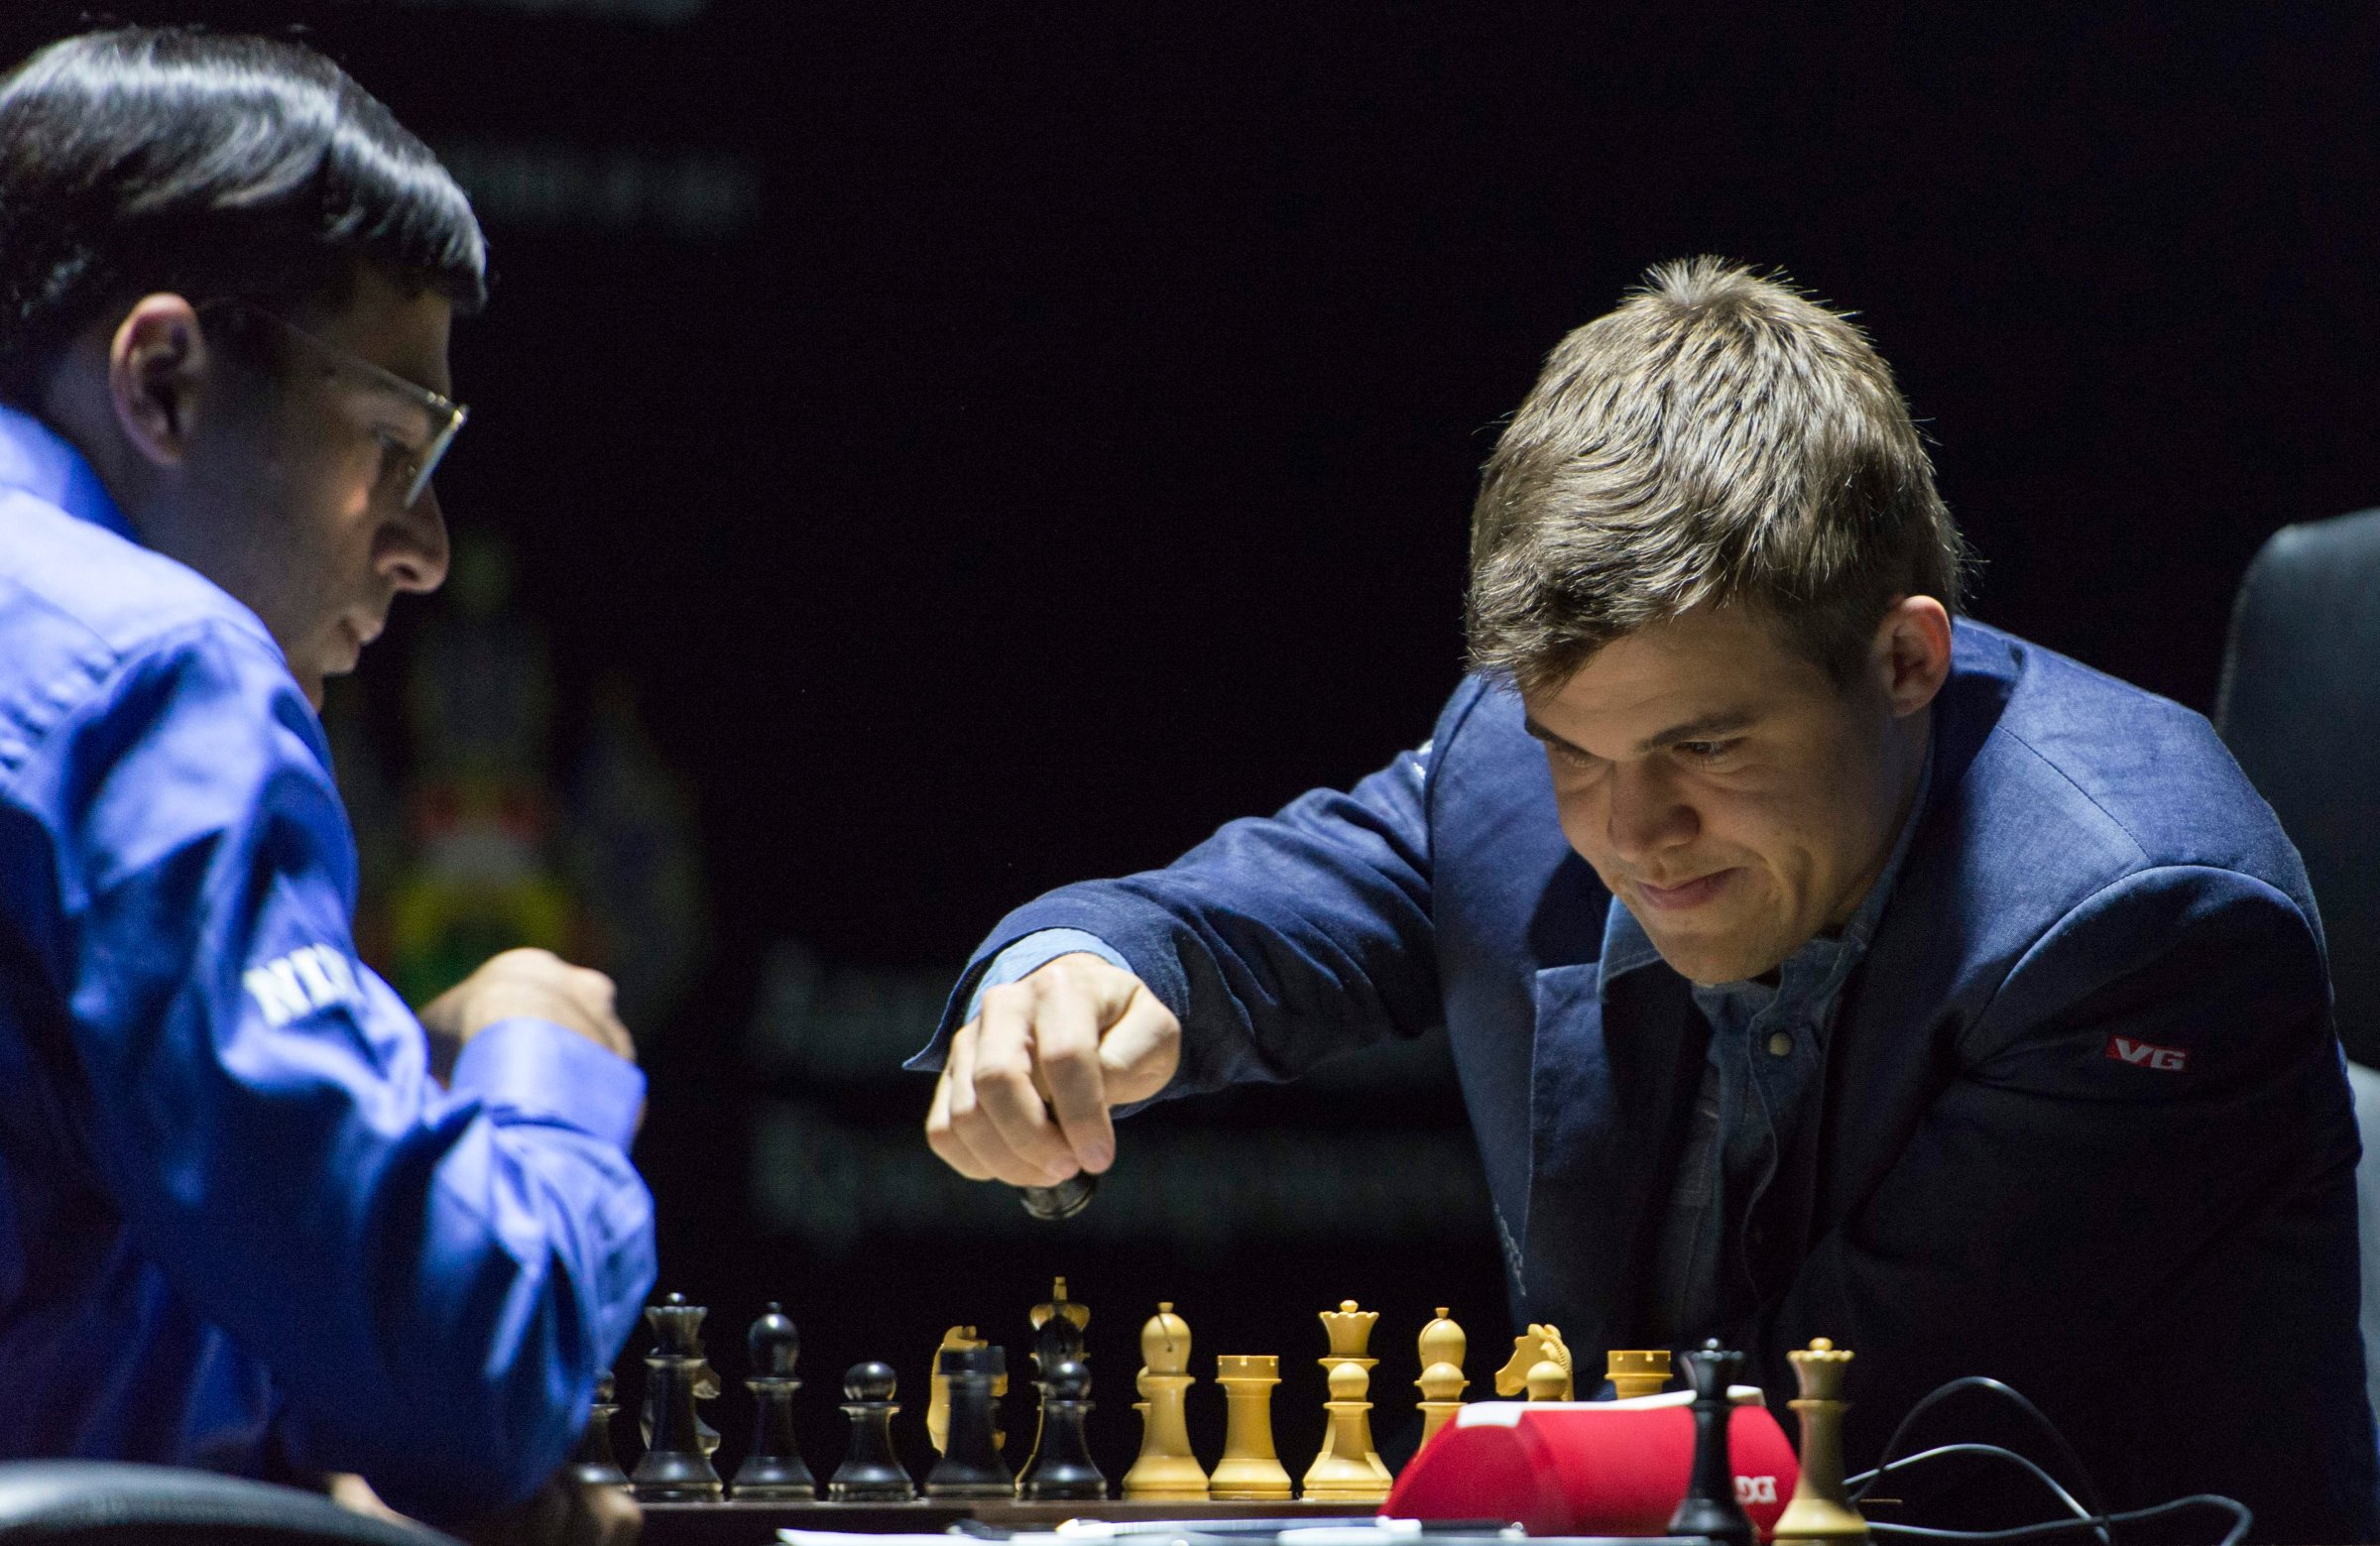 Norway's Magnus Carlsen, currently the top ranked chess player in the world makes a move as he plays against India's former World Champion Vishwanathan Anand at the FIDE World Chess Championship Match in Sochi, Russia on Nov. 9, 2014.